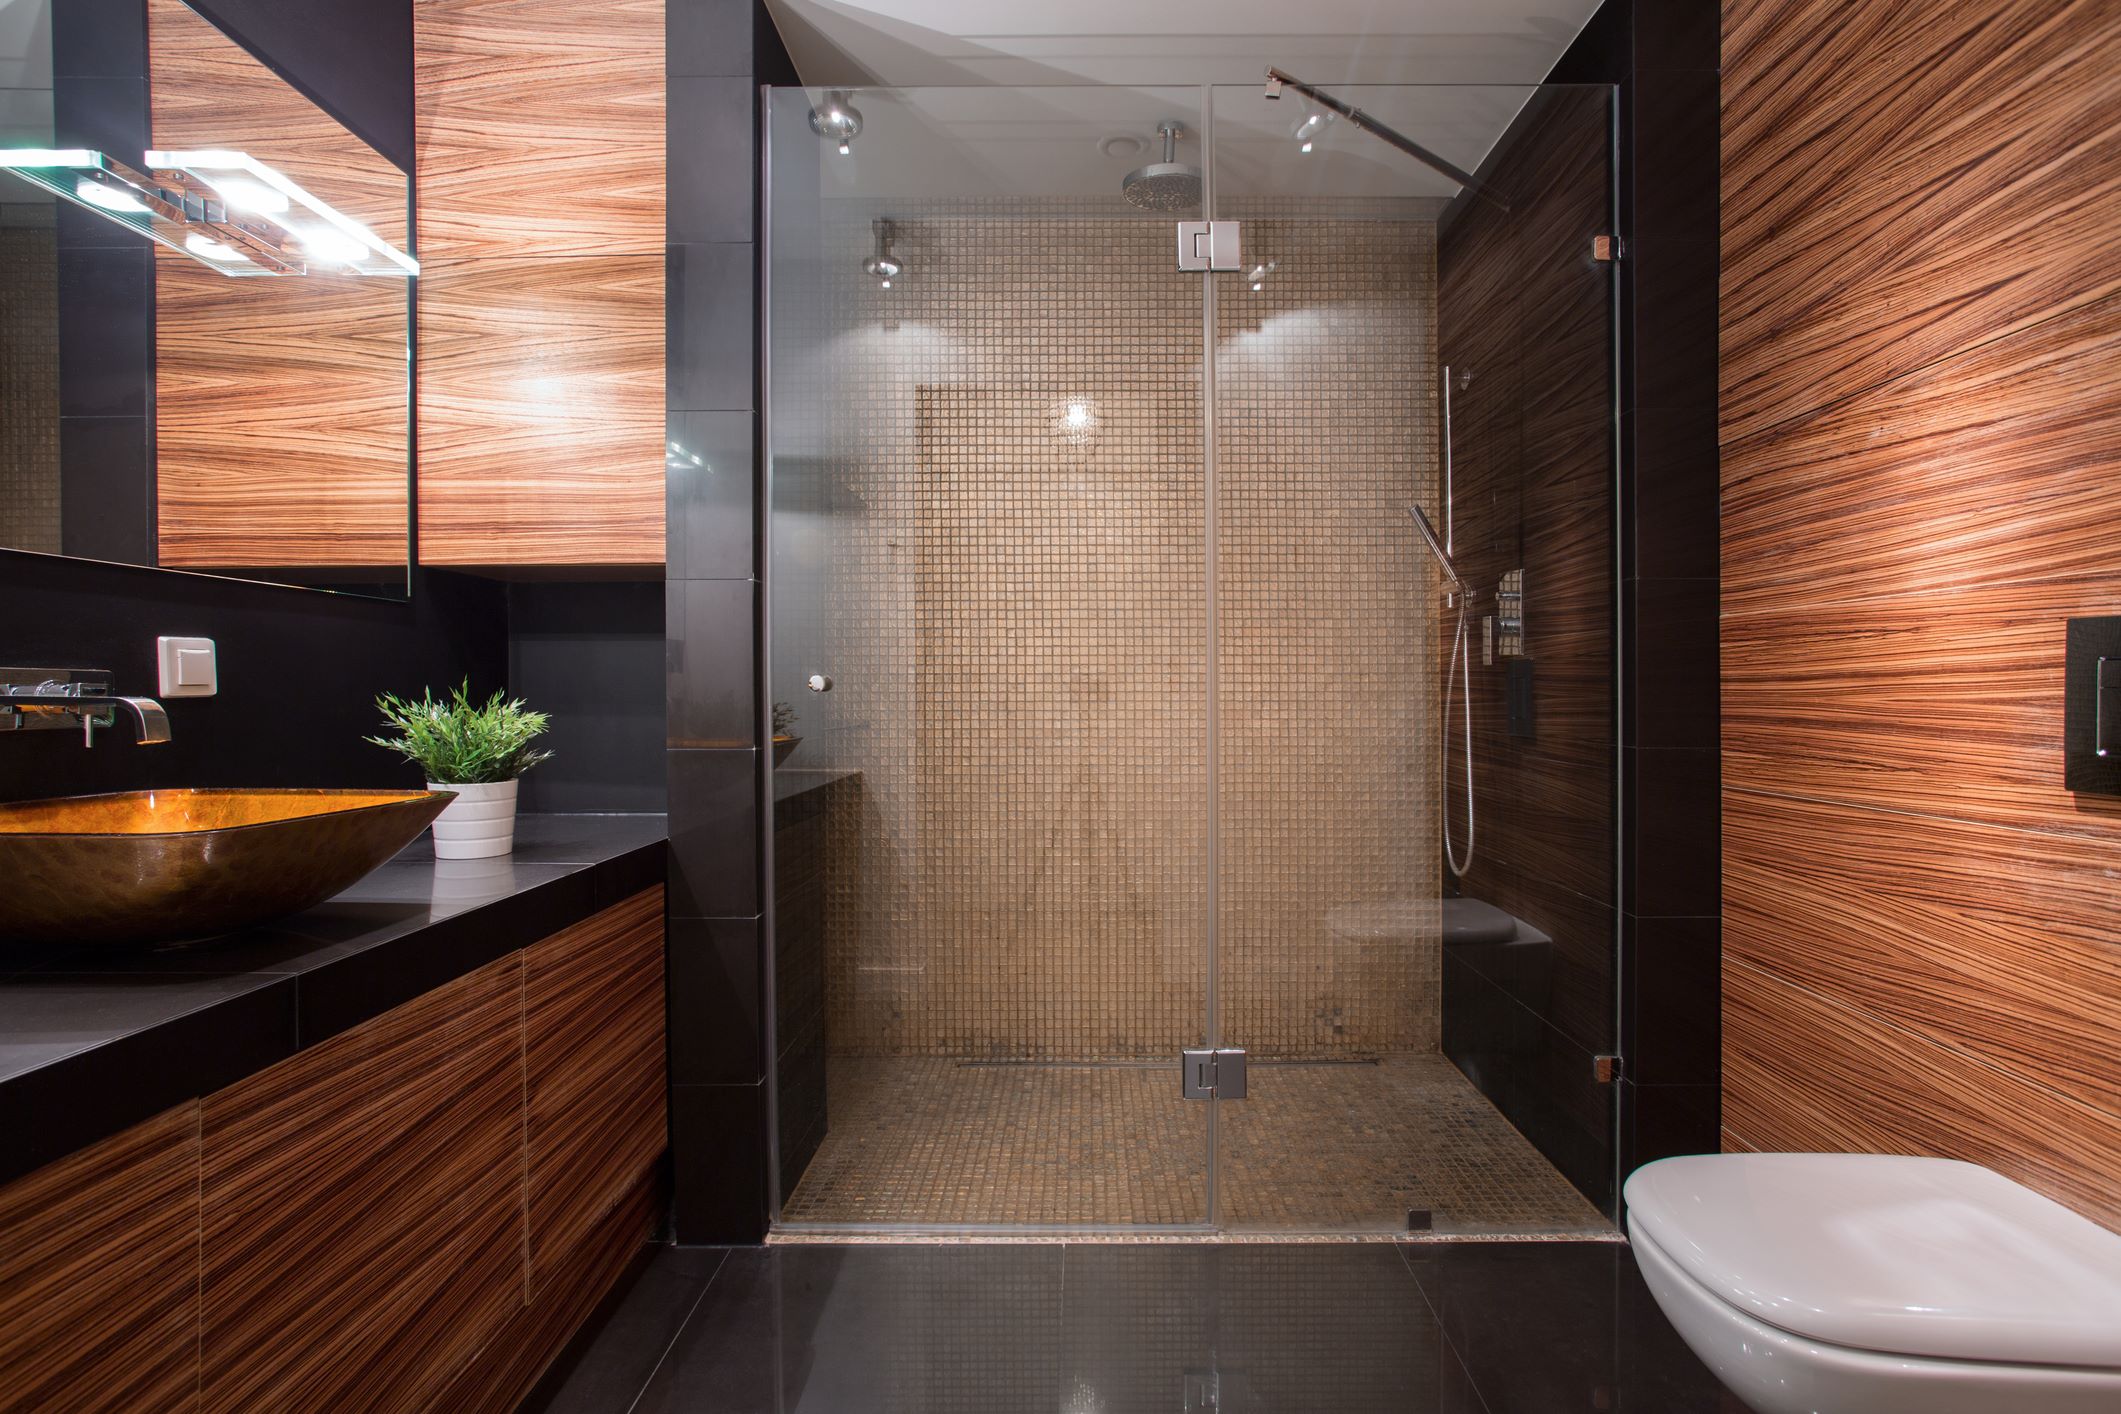 Bathroom remodel financing can make all the difference in the success of your project.